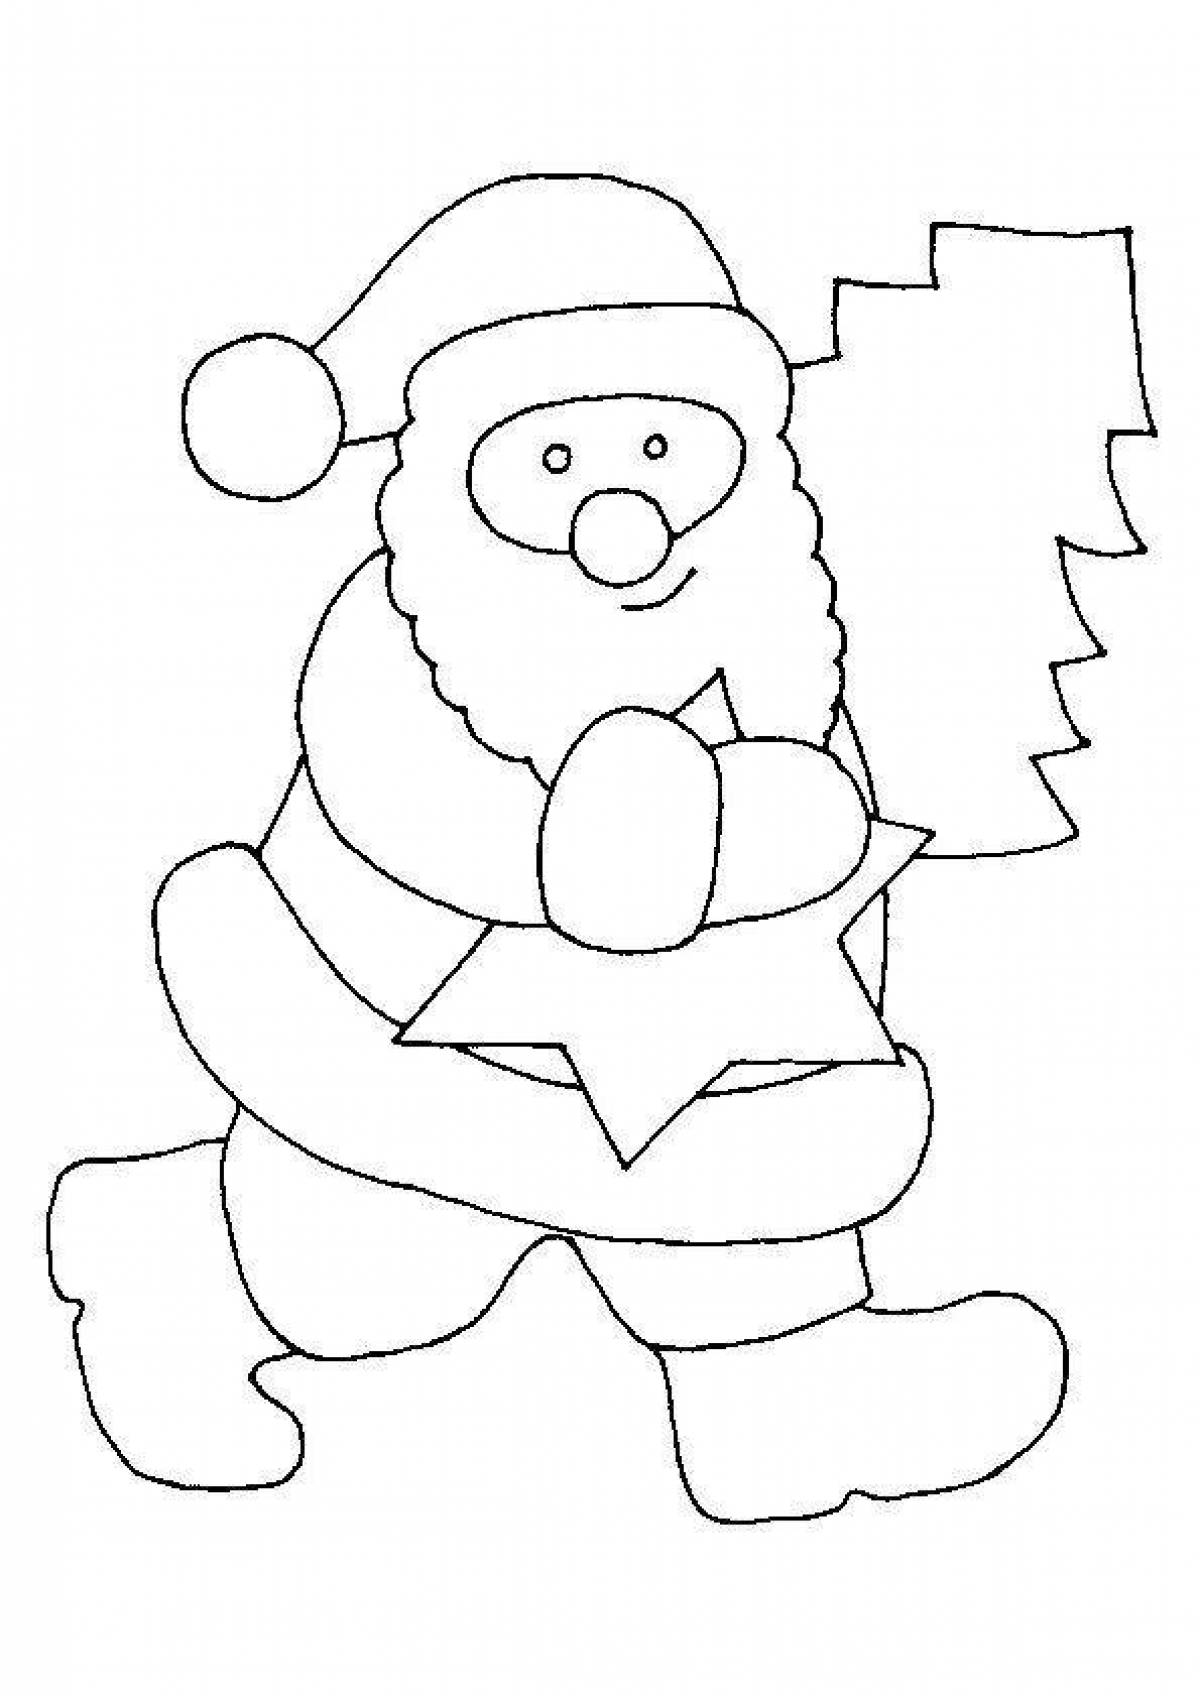 Creative Santa Claus coloring book for 2-3 year olds